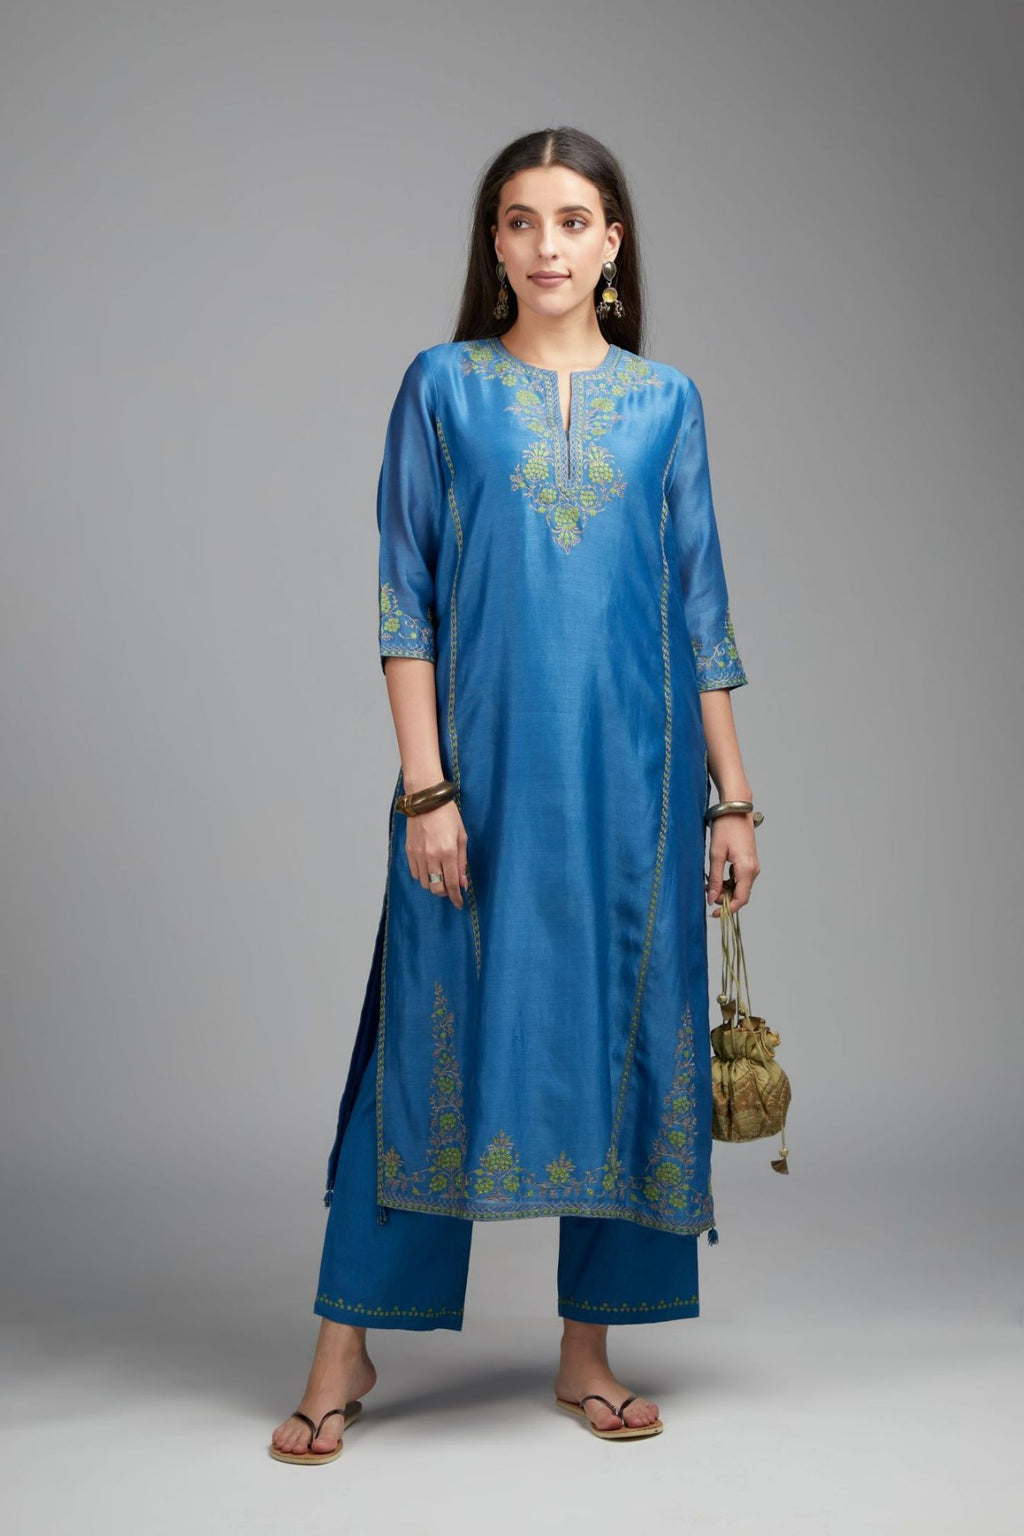 Blue straight kurta set detailed with contrast coloured embroidery at neck and side panel joint seams